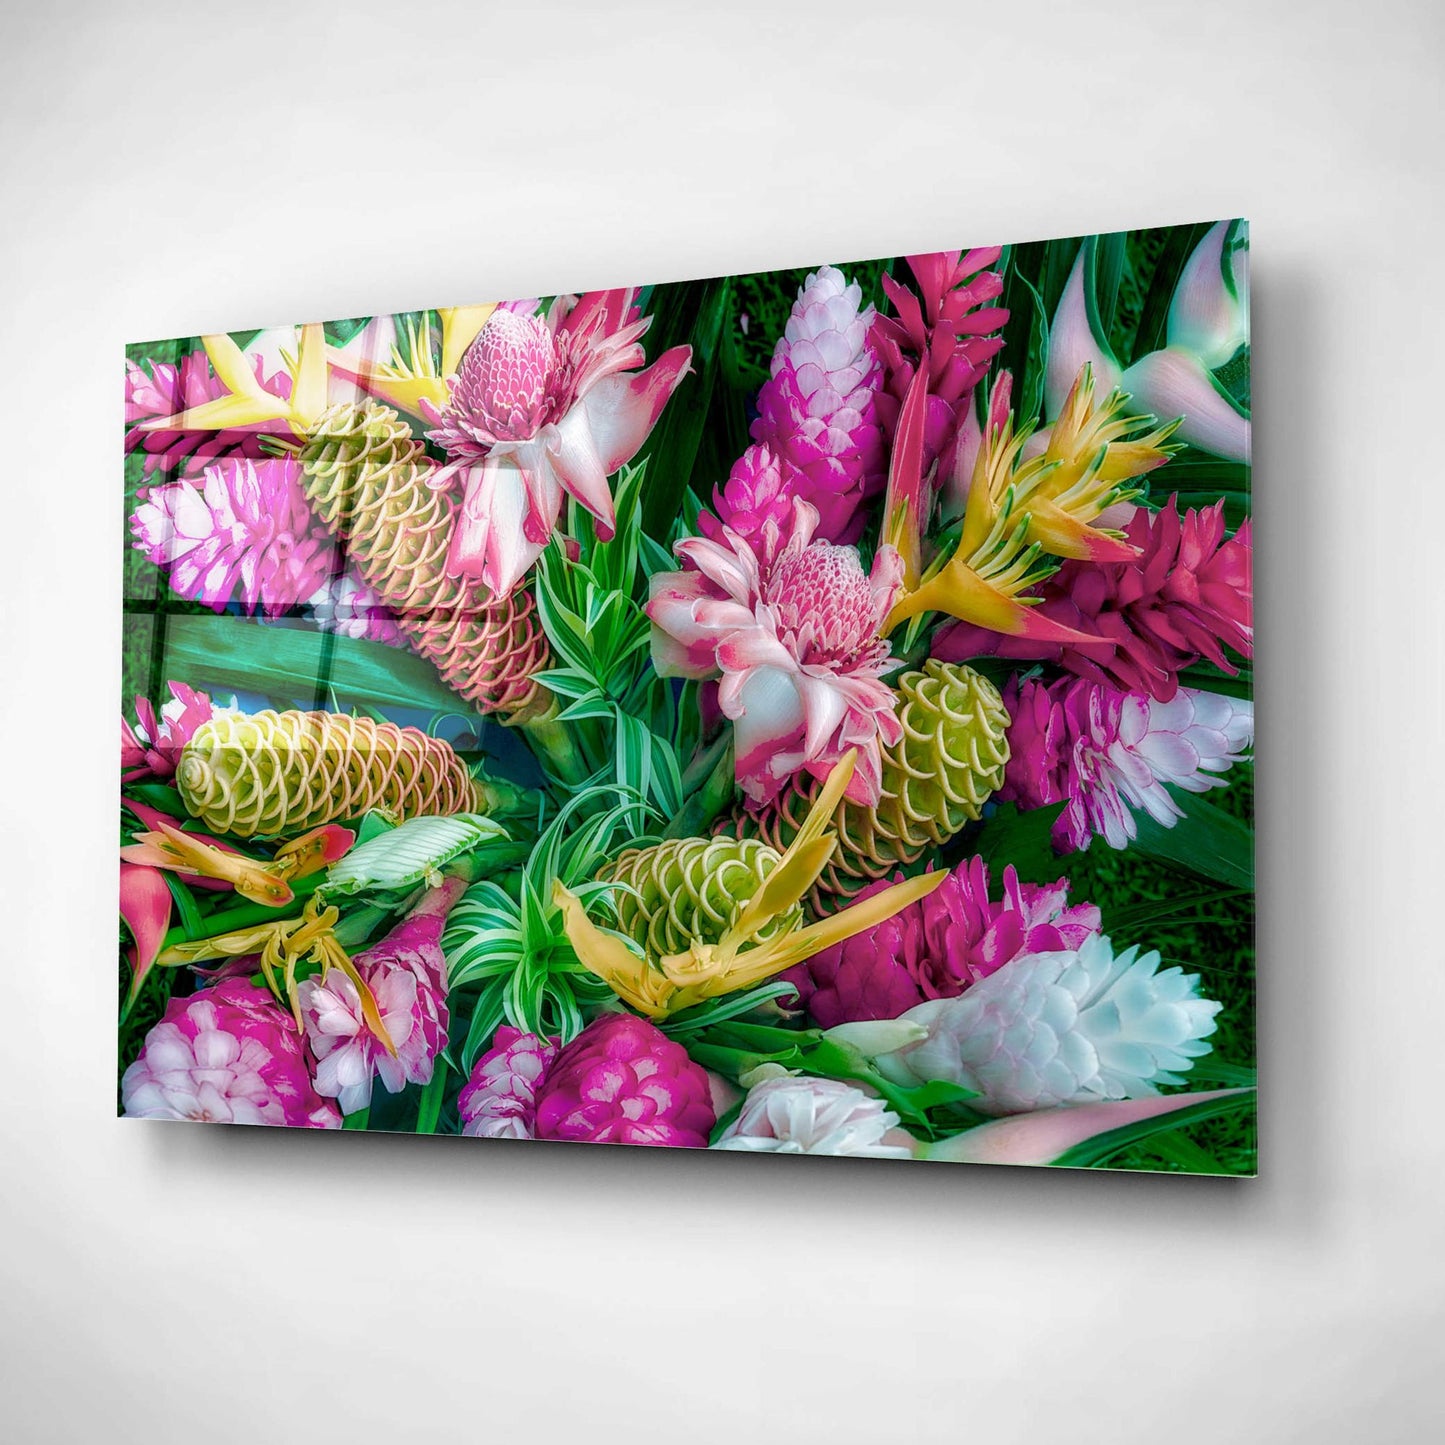 Epic Art 'Tropical Floral' by Dennis Frates, Acrylic Glass Wall Art,16x12